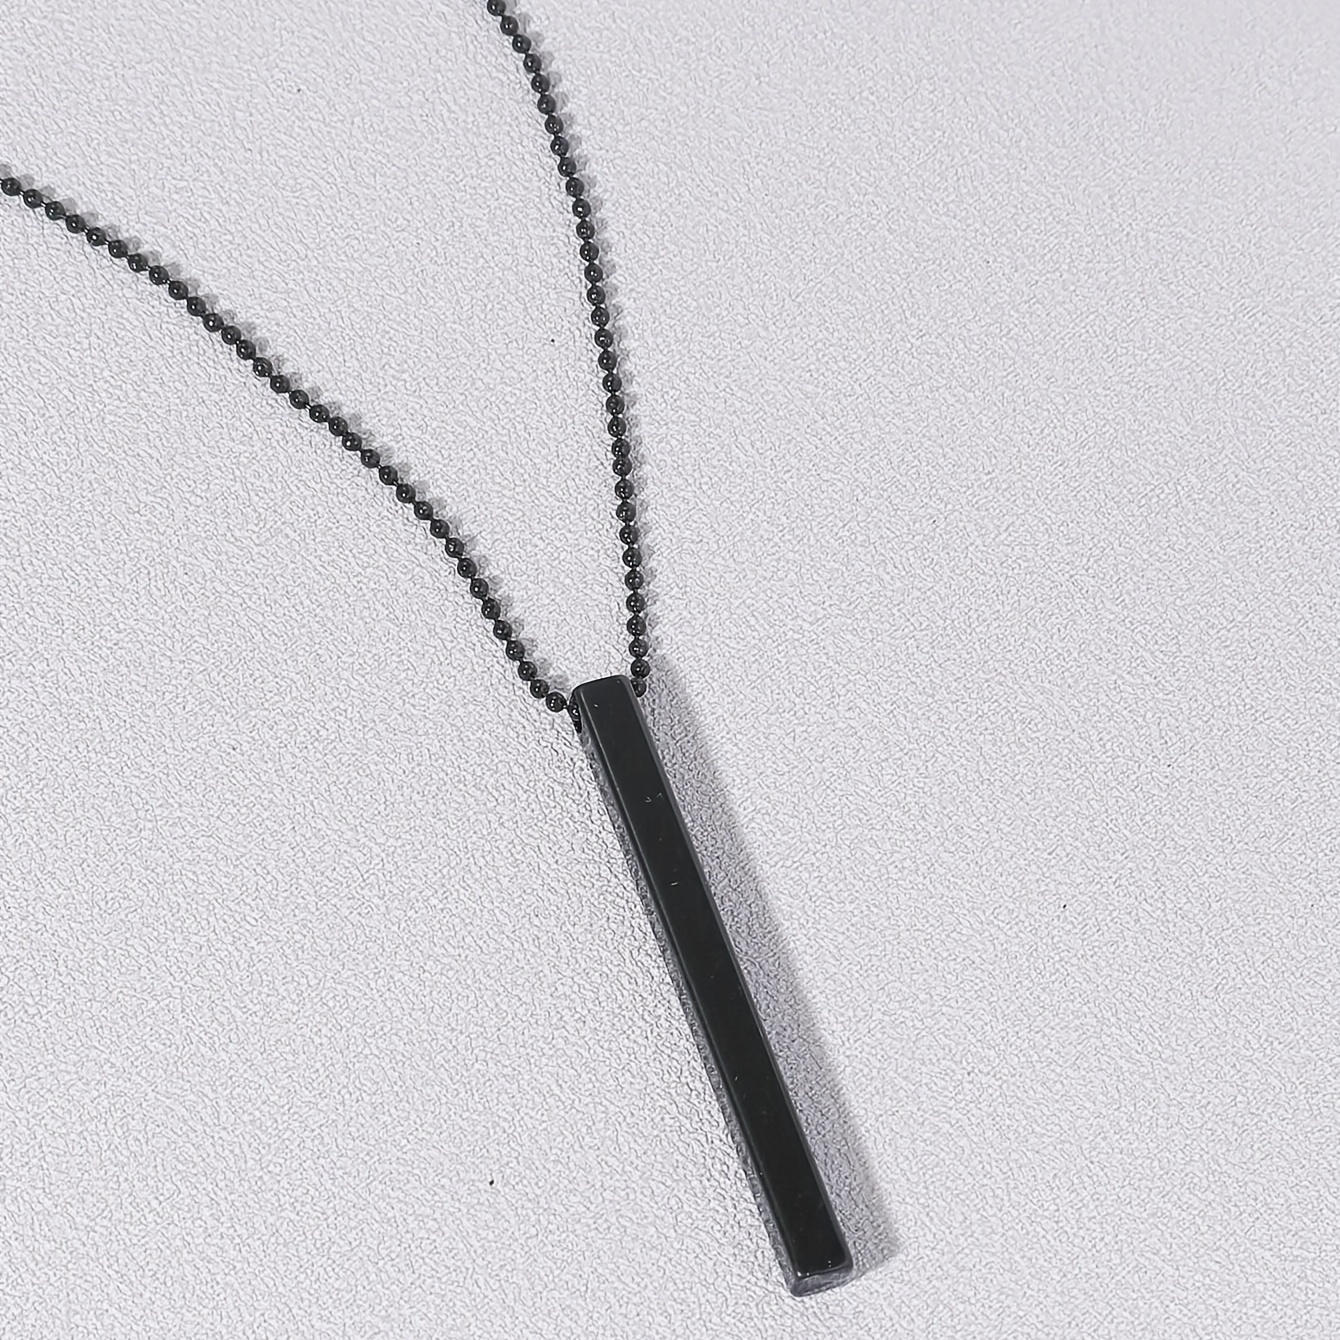 Fashion Rectangle Stainless Steel Pendant Men Necklace Classic Cuban Chain  Necklace For Men Jewelry Gift